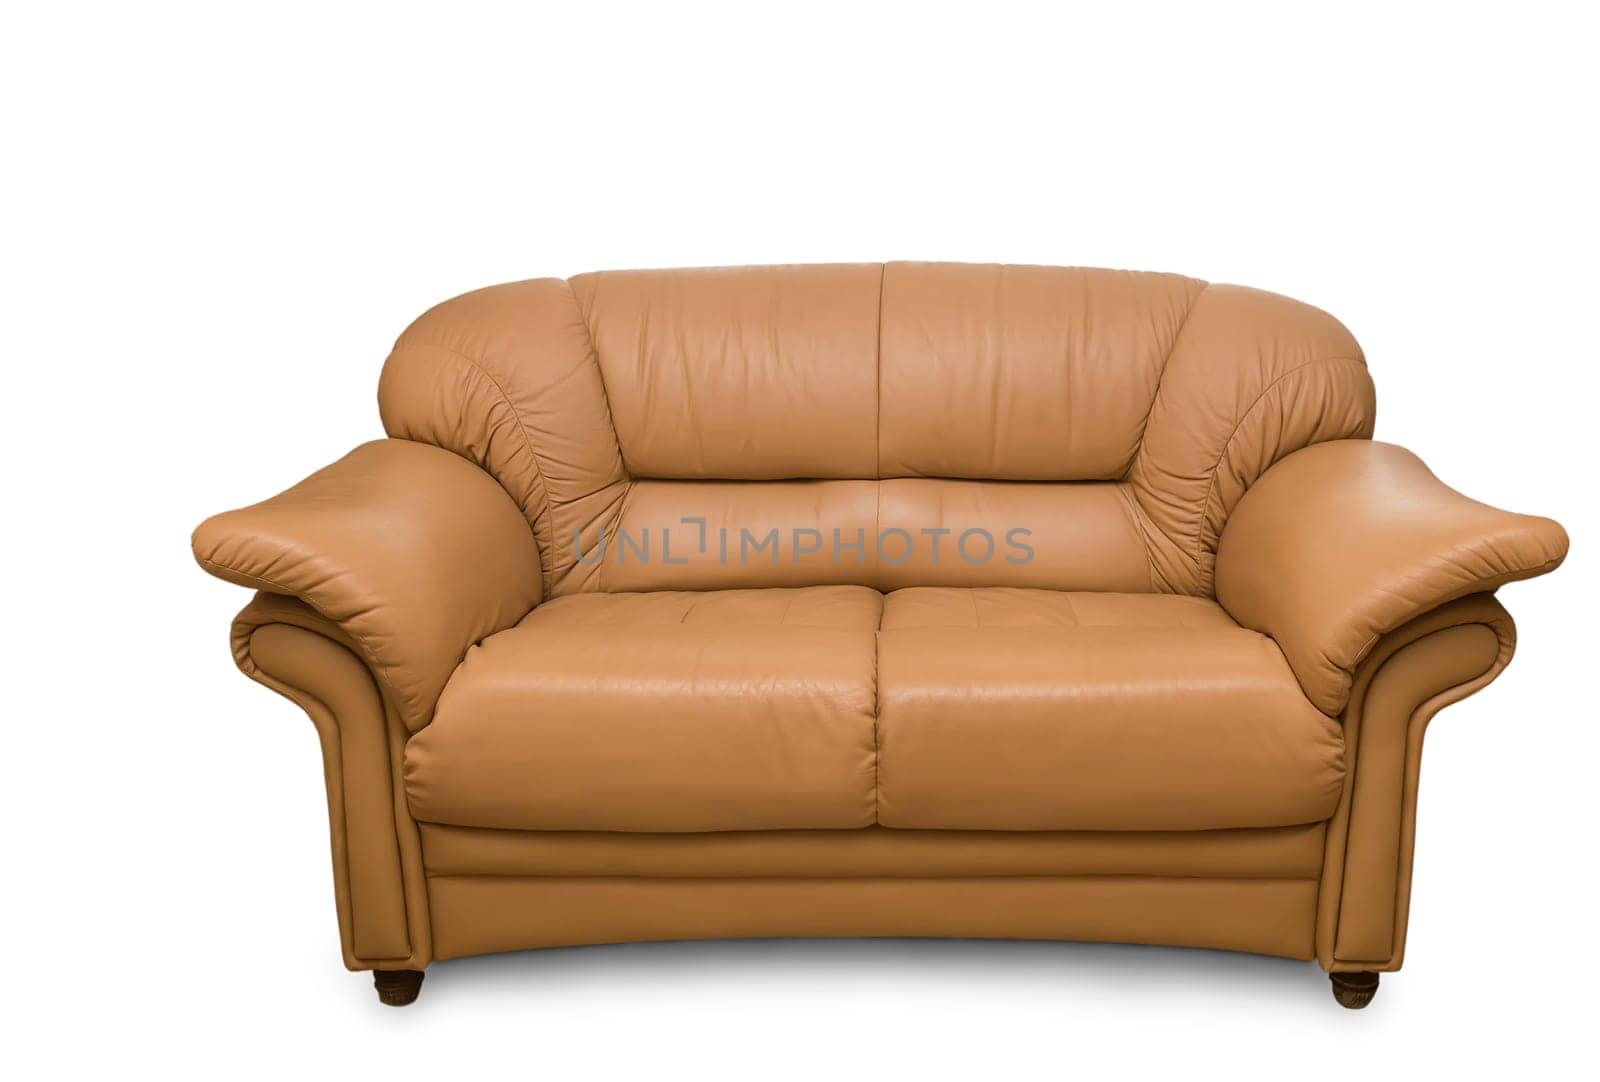 Small convenient leather sofa. Presented on a white background.